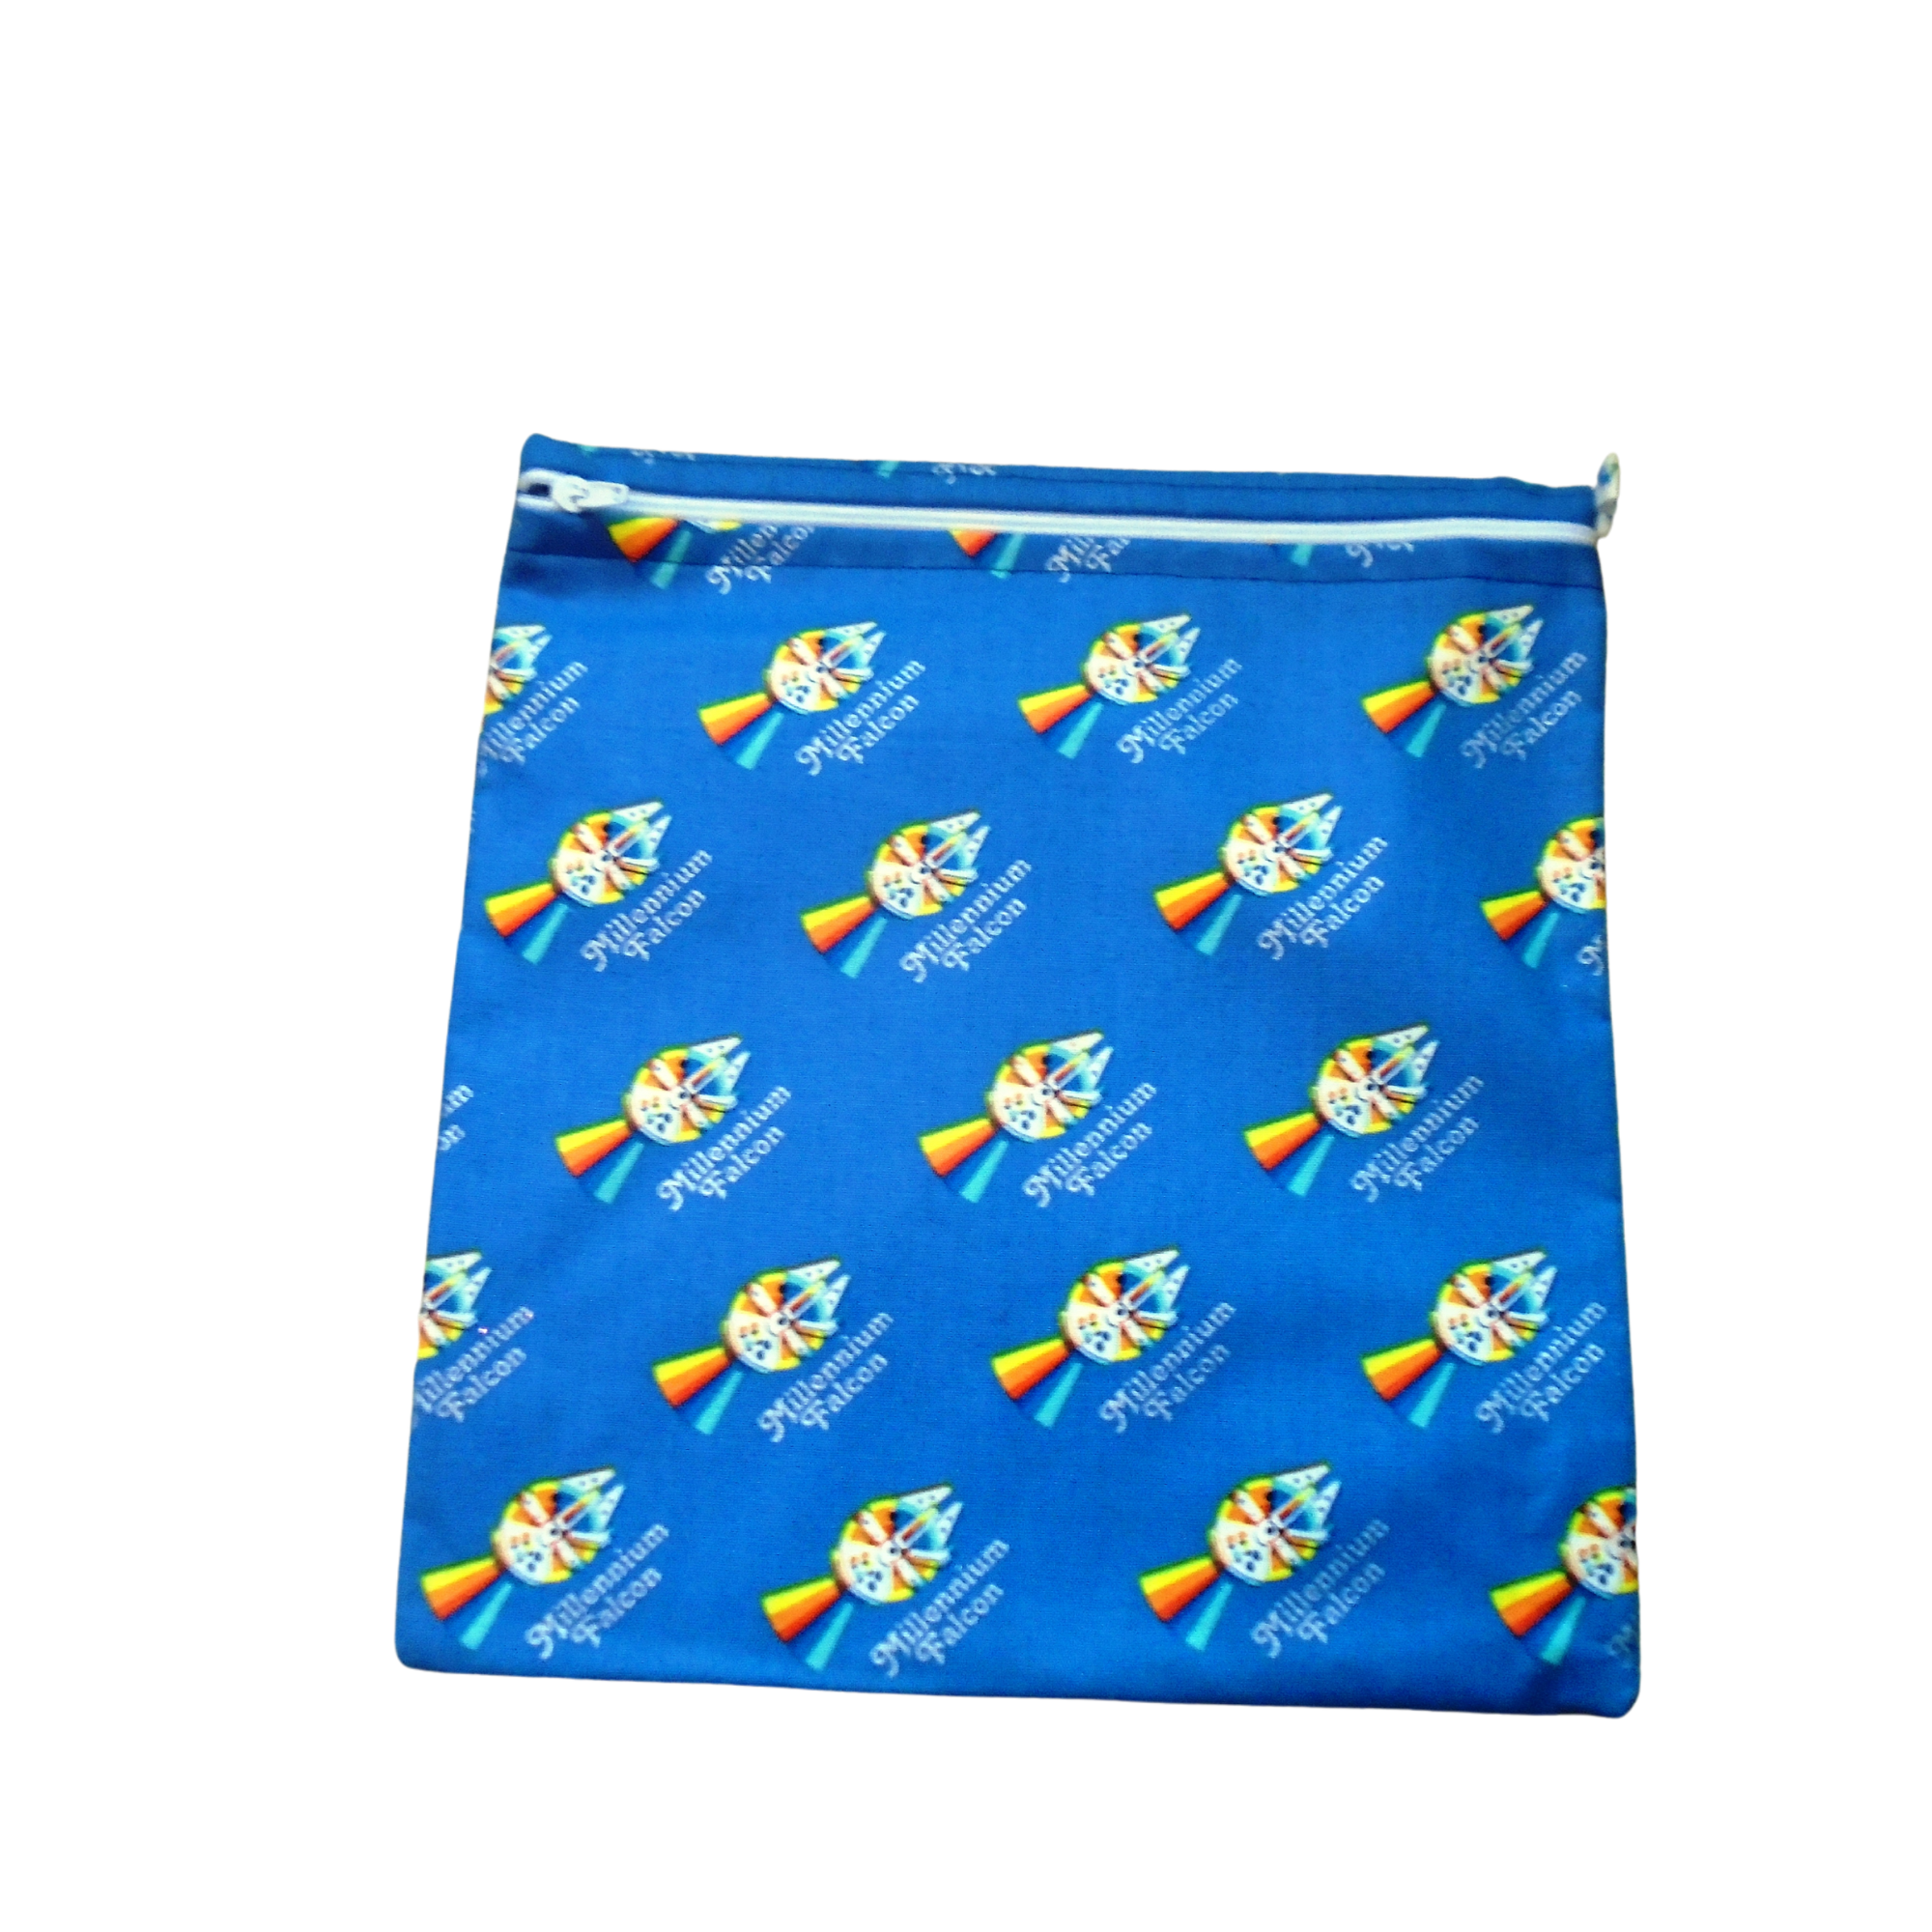 Rainbow Space Rocket - Large Poppins Pouch - Waterproof, Washable, Food Safe